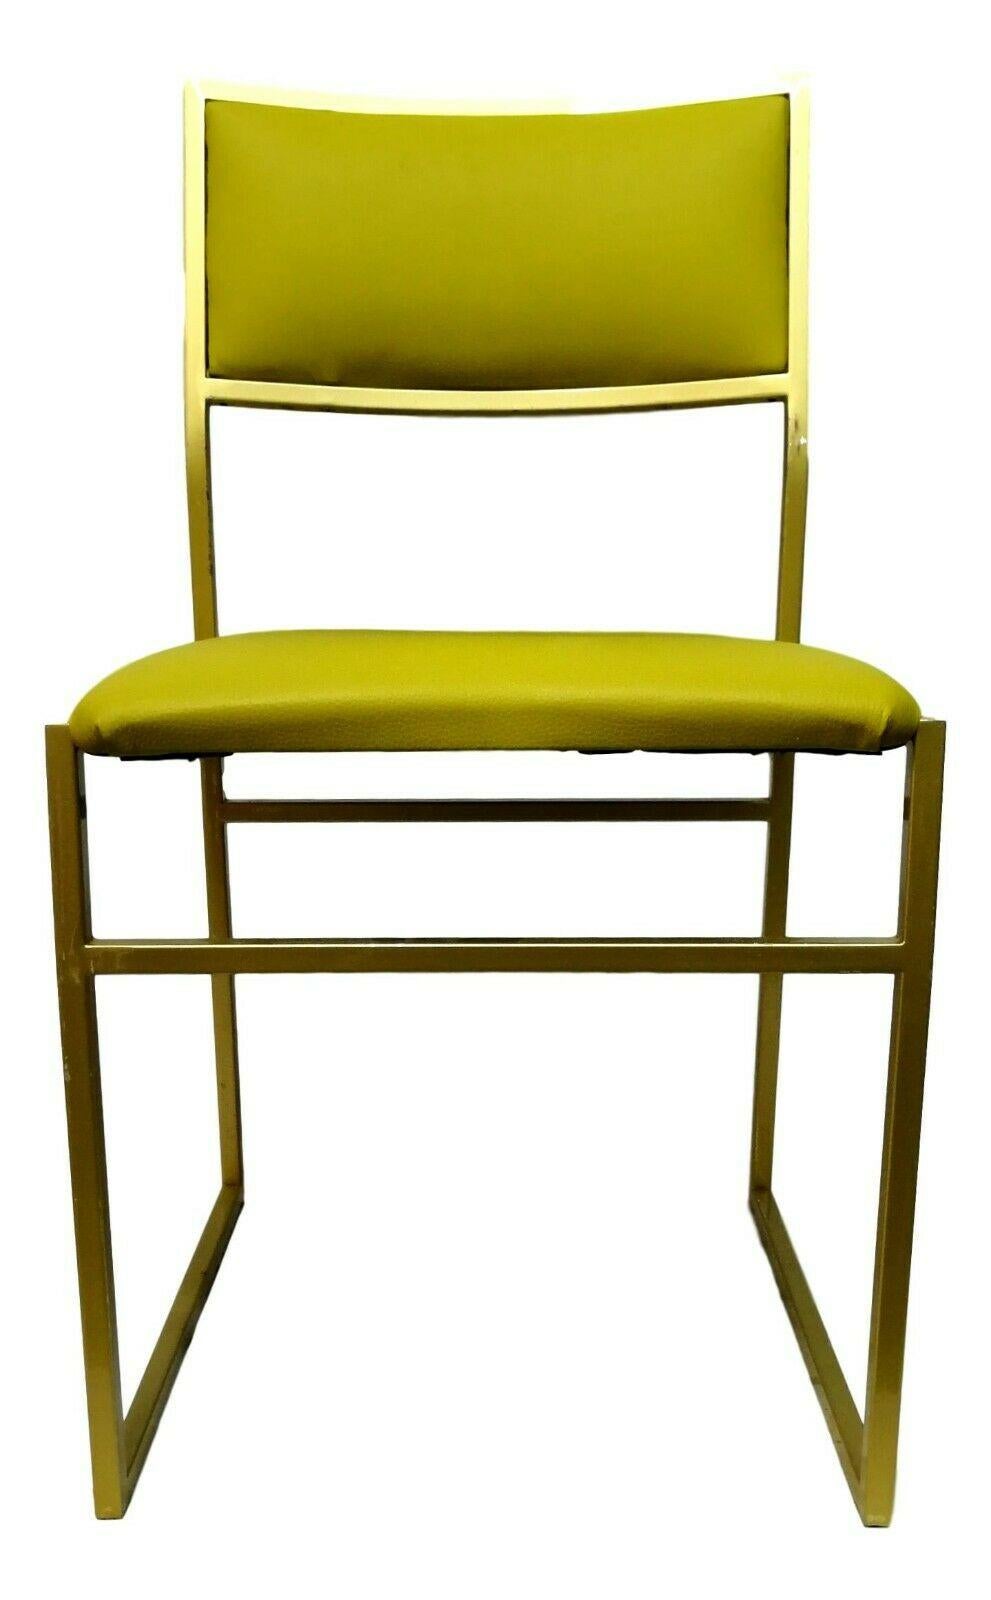 Collectible Chair in Gold Metal and Acid Green Upholstery, 1970s In Good Condition For Sale In taranto, IT